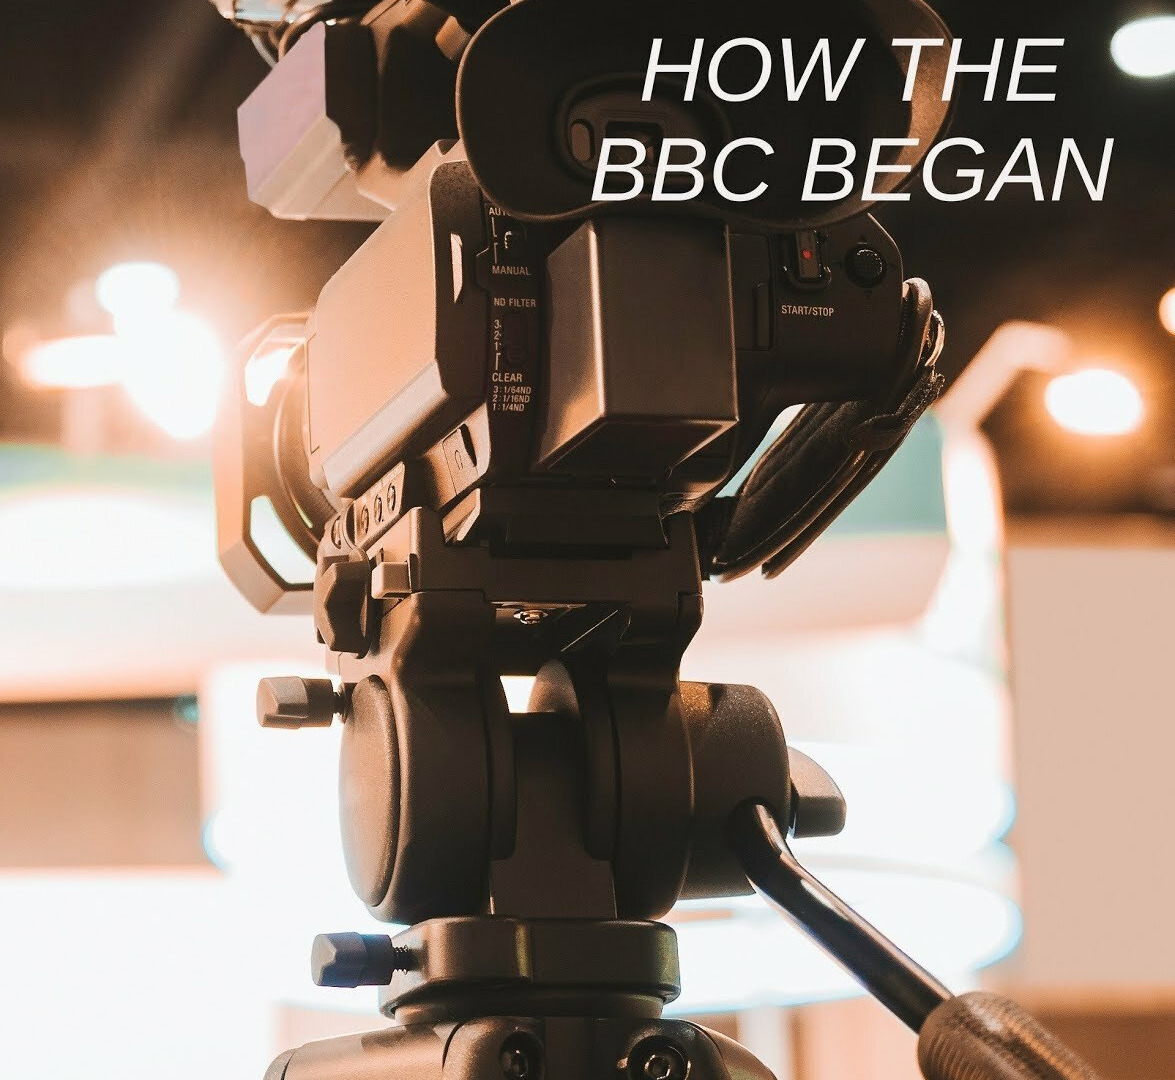 Show How the BBC Began